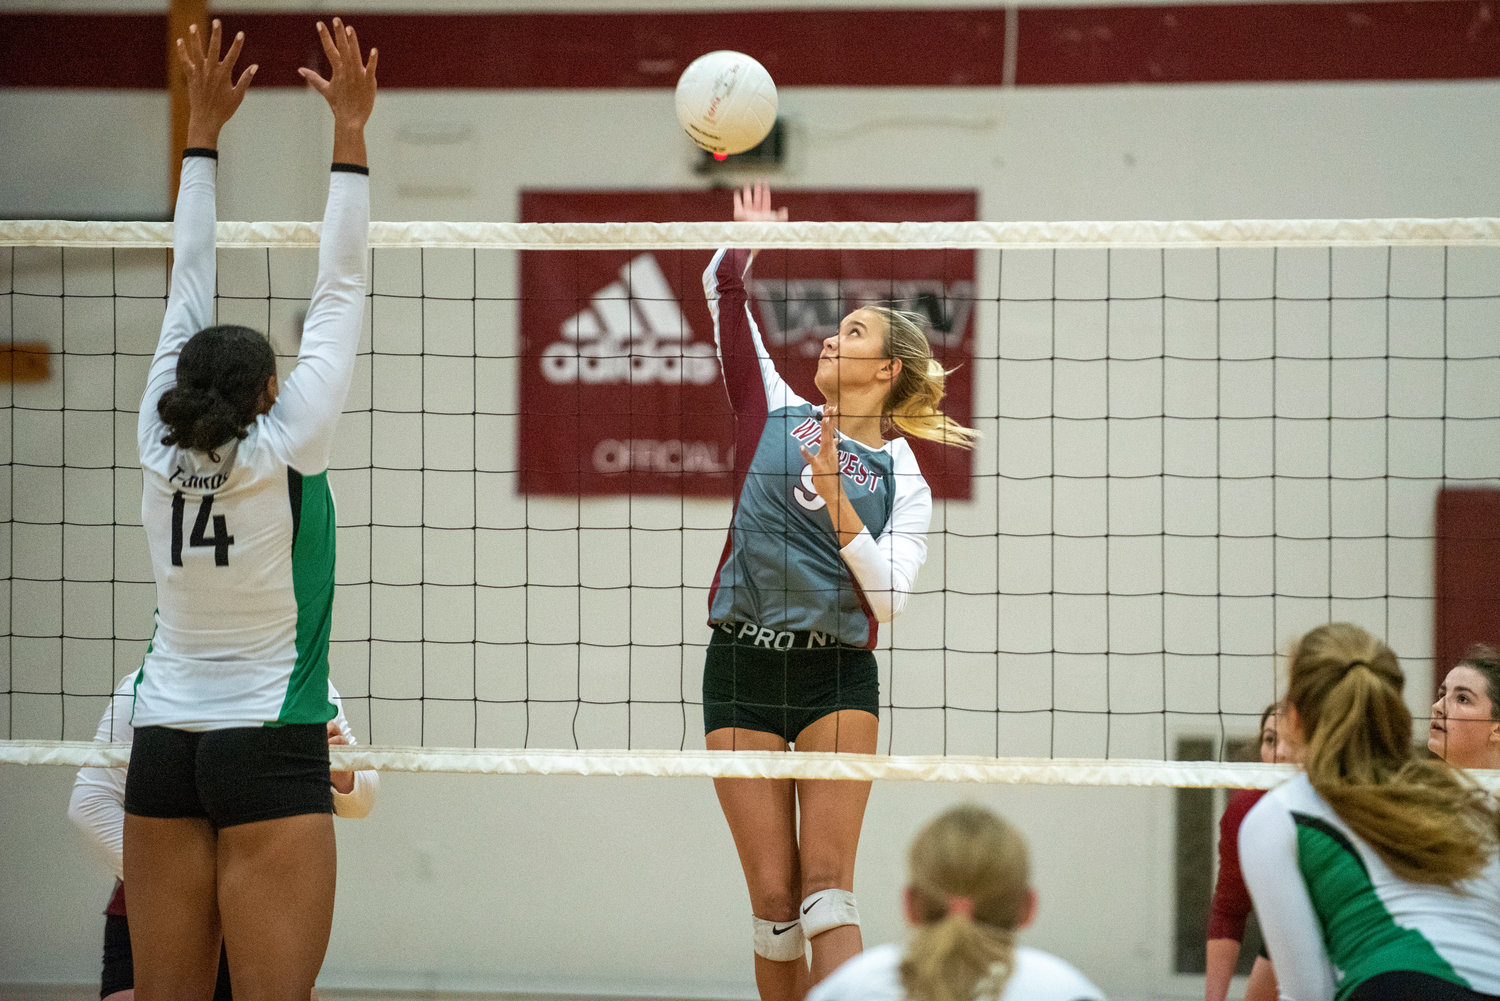 W.F. West's Ava Olsen (9) hammers a spike against Tumwater's Bella Burney (14) on Oct. 14, 2021.